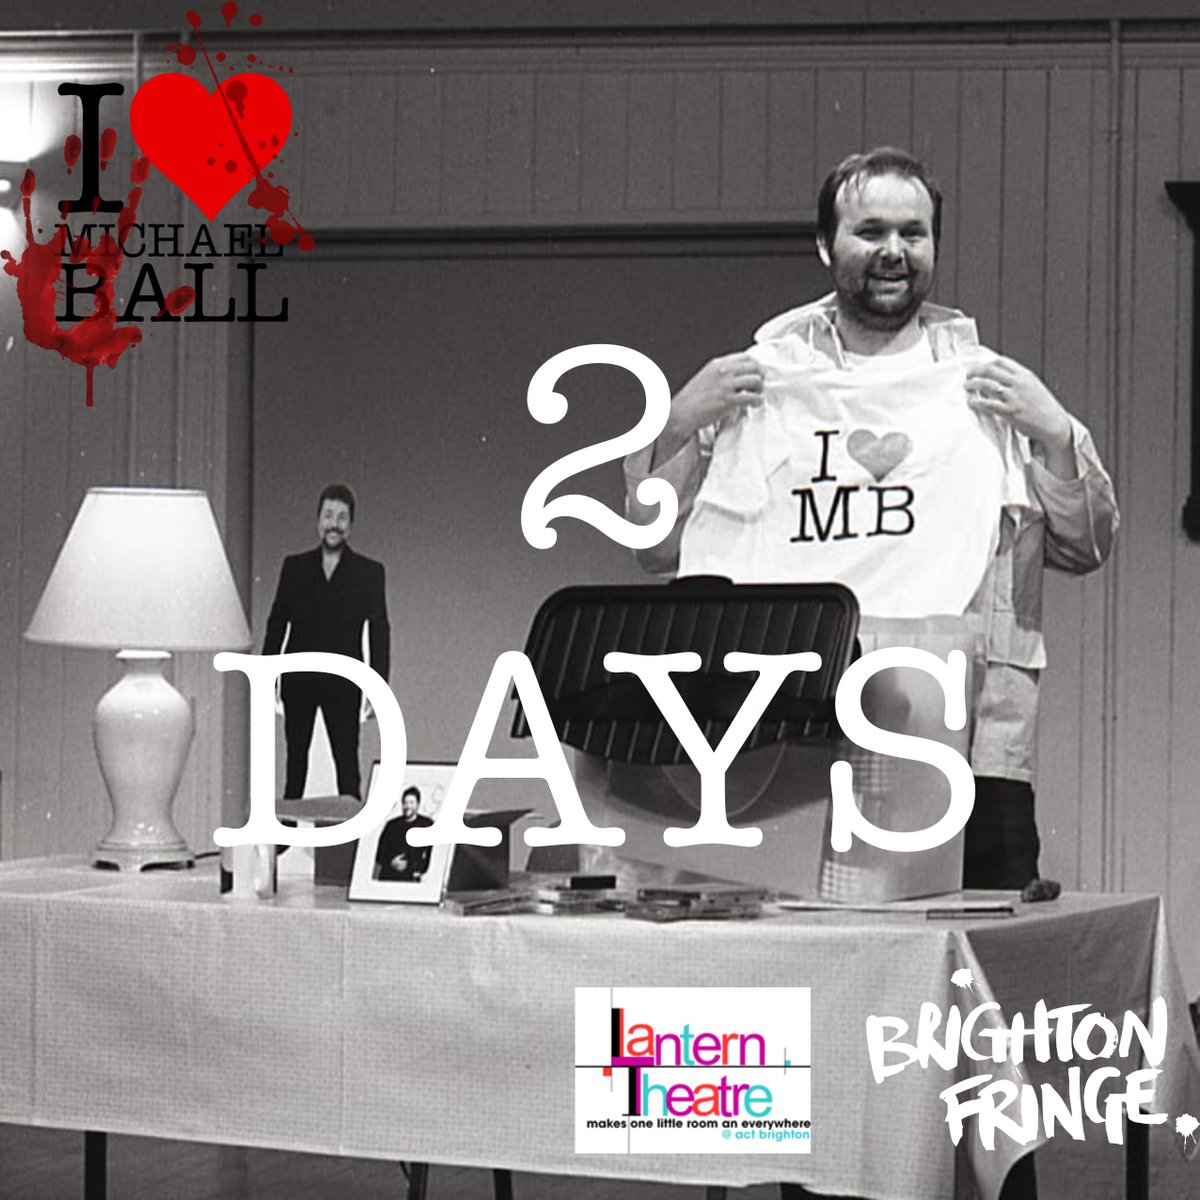 #2DaysToGo

Join the @MBAppreciation this week for their latest meeting to worship the great West End Star!

🎭#IHeartMichaelBall
📍@lanterntheatreb @brightonfringe
🗓️31 MAY, 2 & 3 JUNE

#MichaelBall #Brighton #Fringe #Theatre #JourneyIntoFringe #FanClub